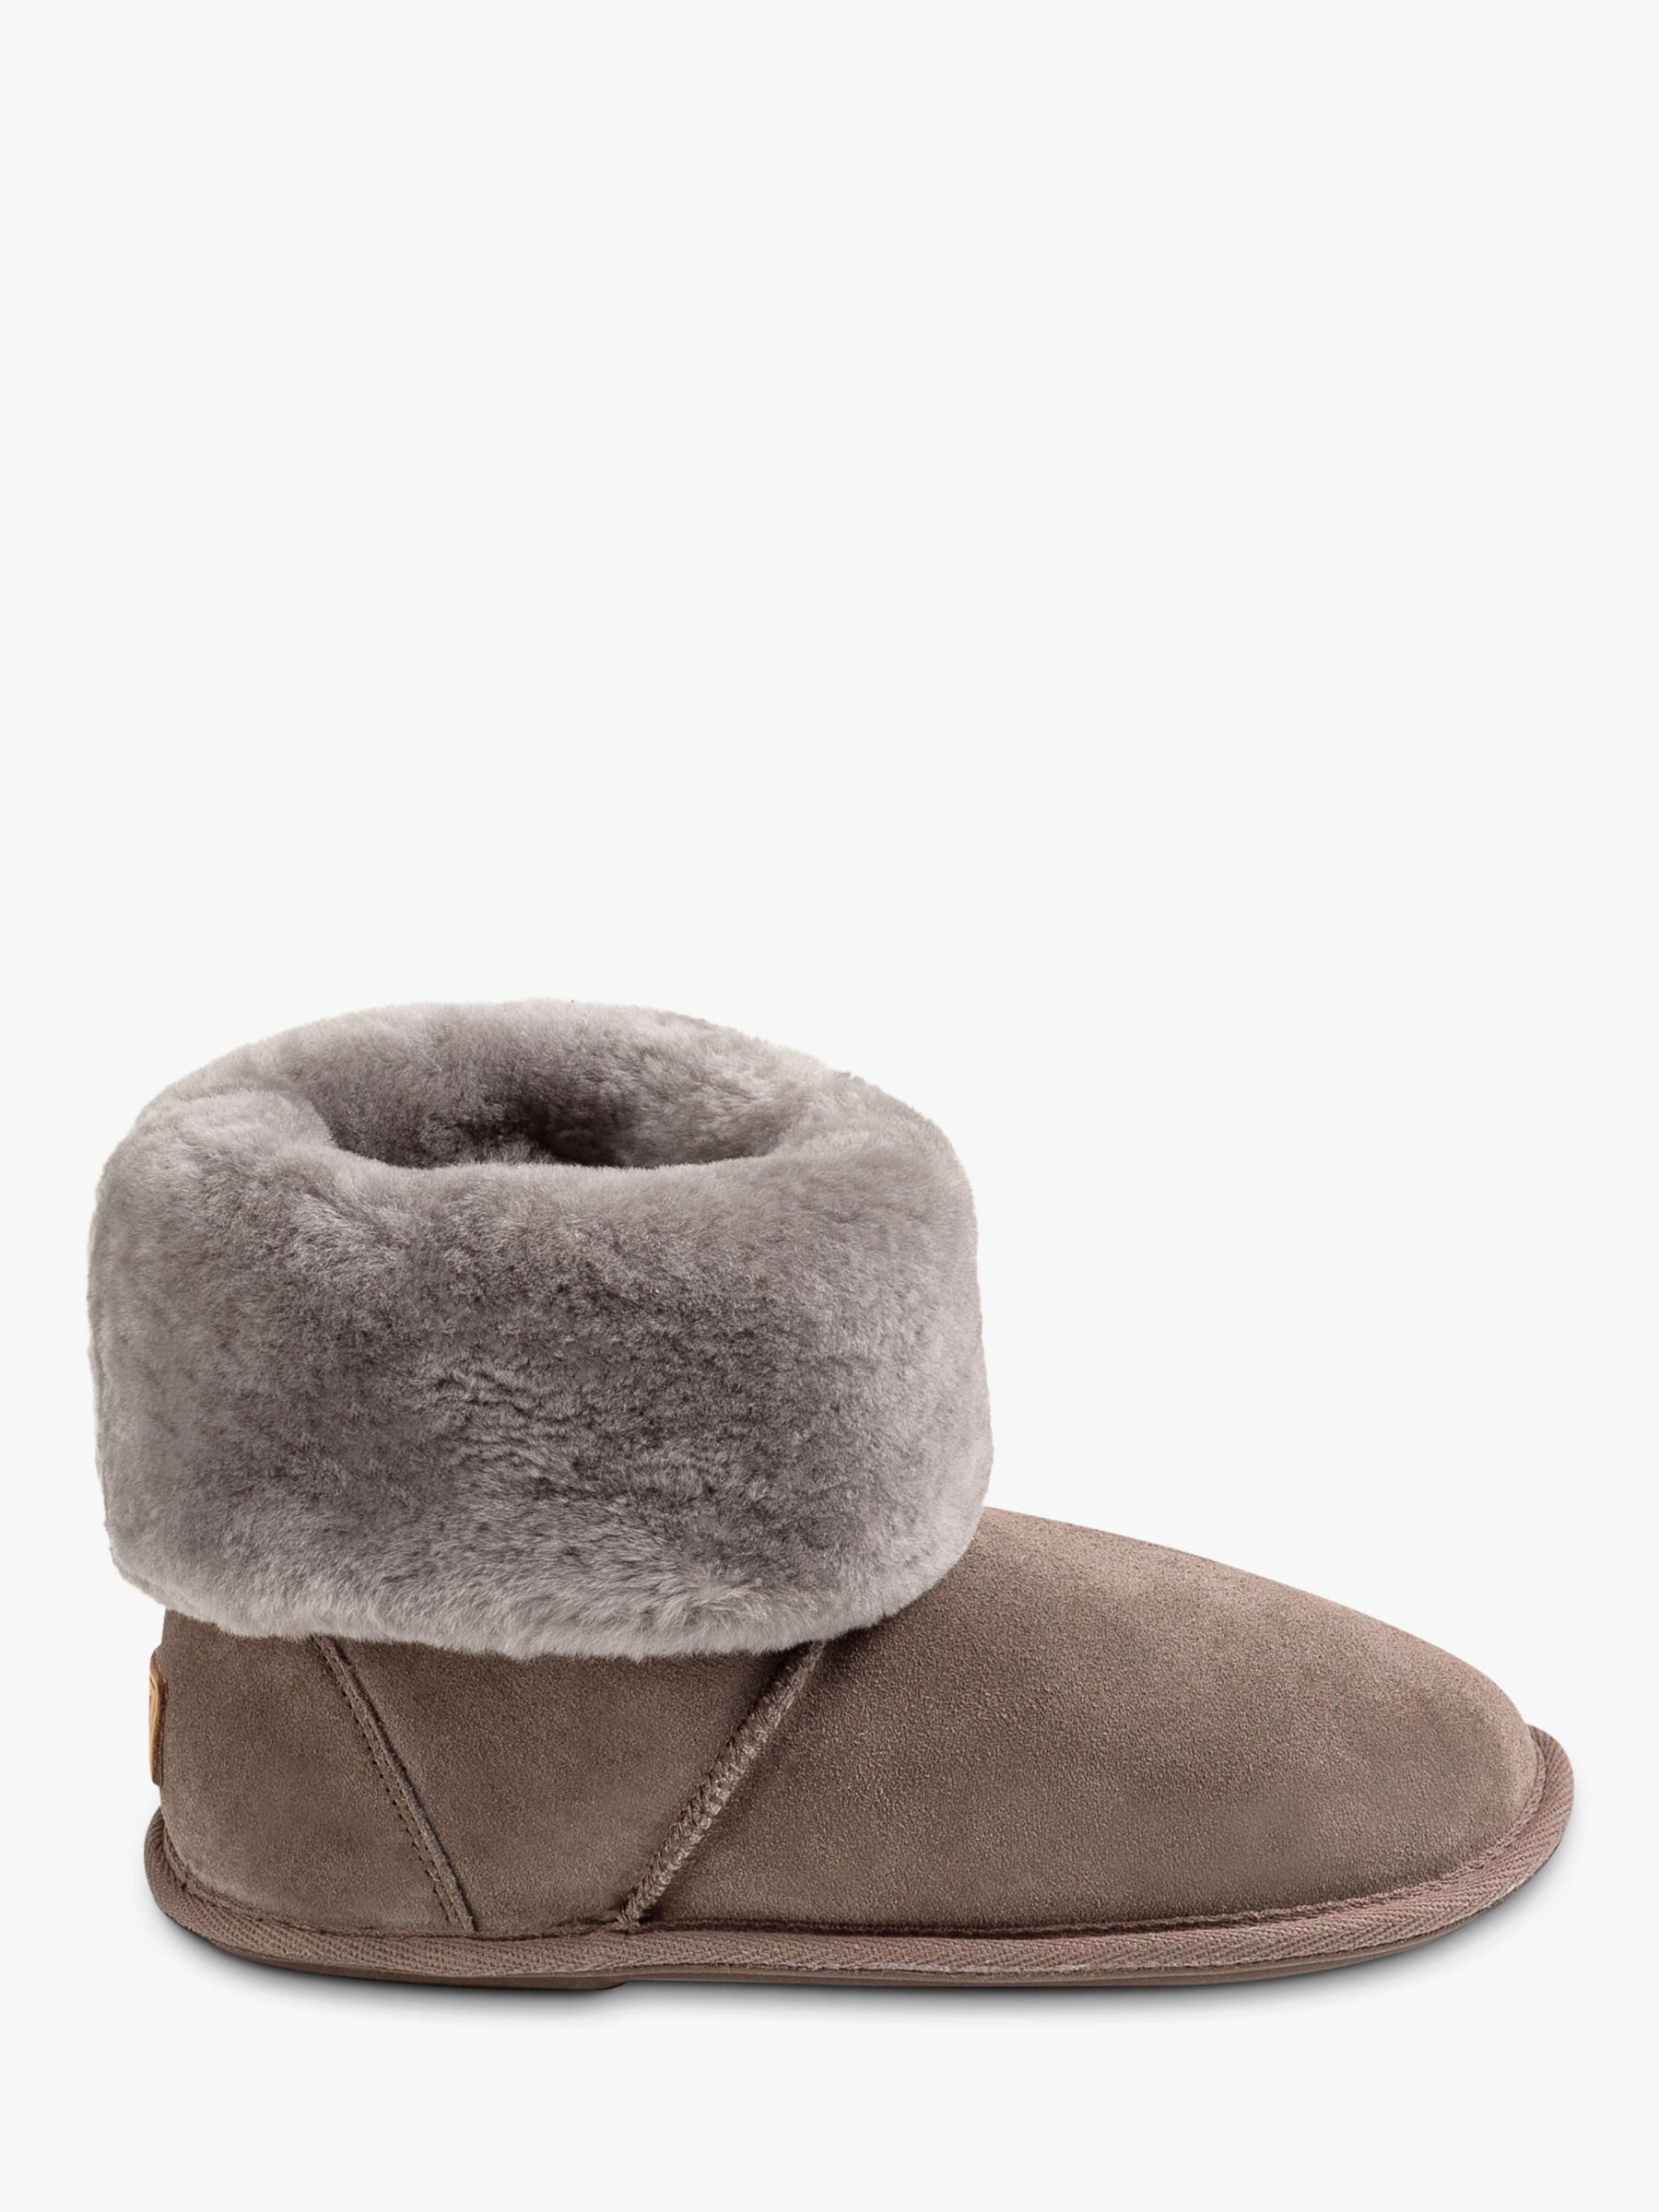 Just Sheepskin Albery Roll Cuff Boot Slippers at John Lewis & Partners